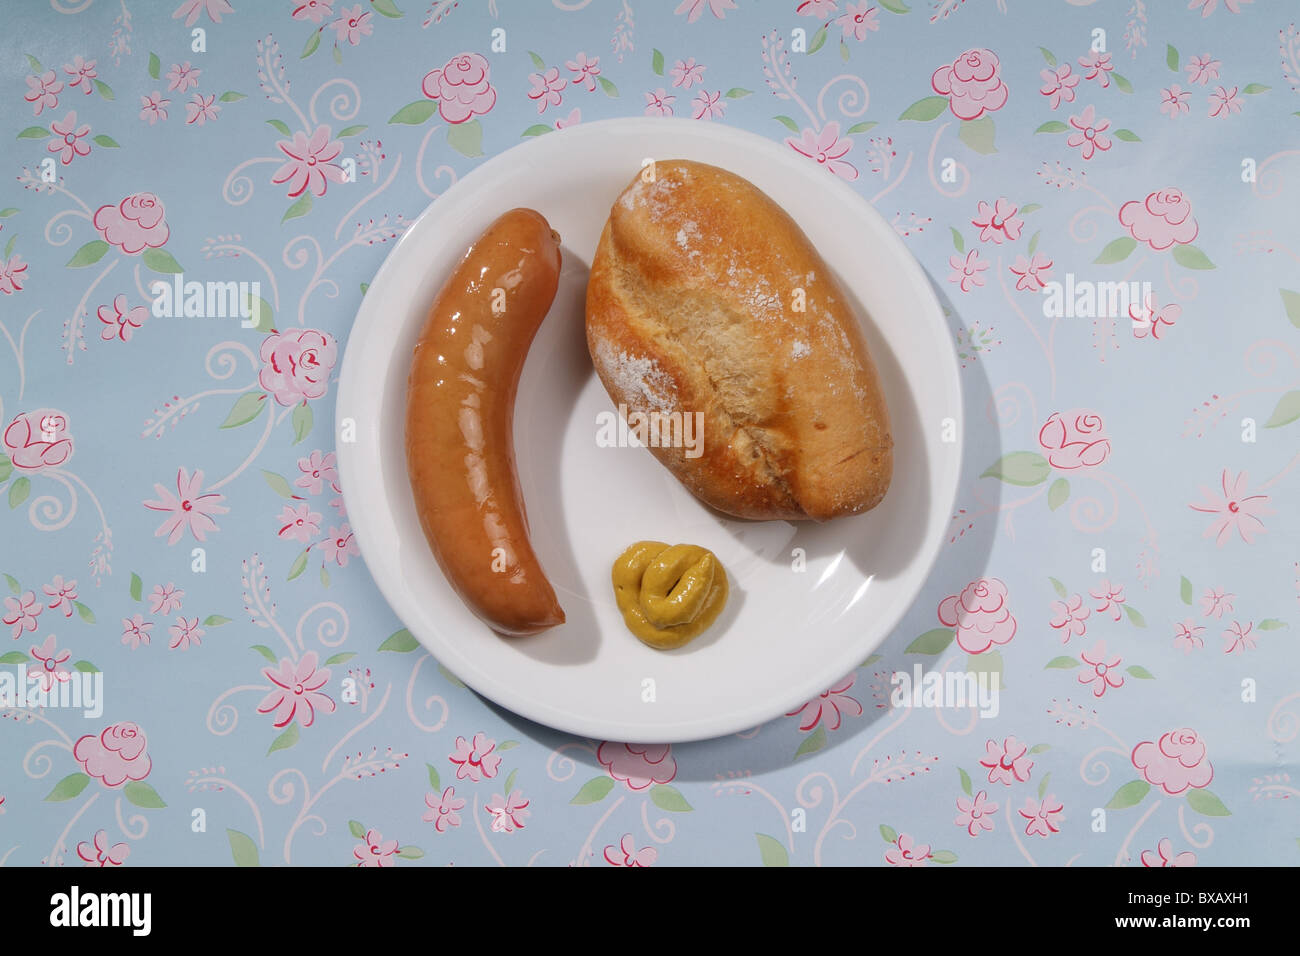 A sausage with mustard and a bun Stock Photo